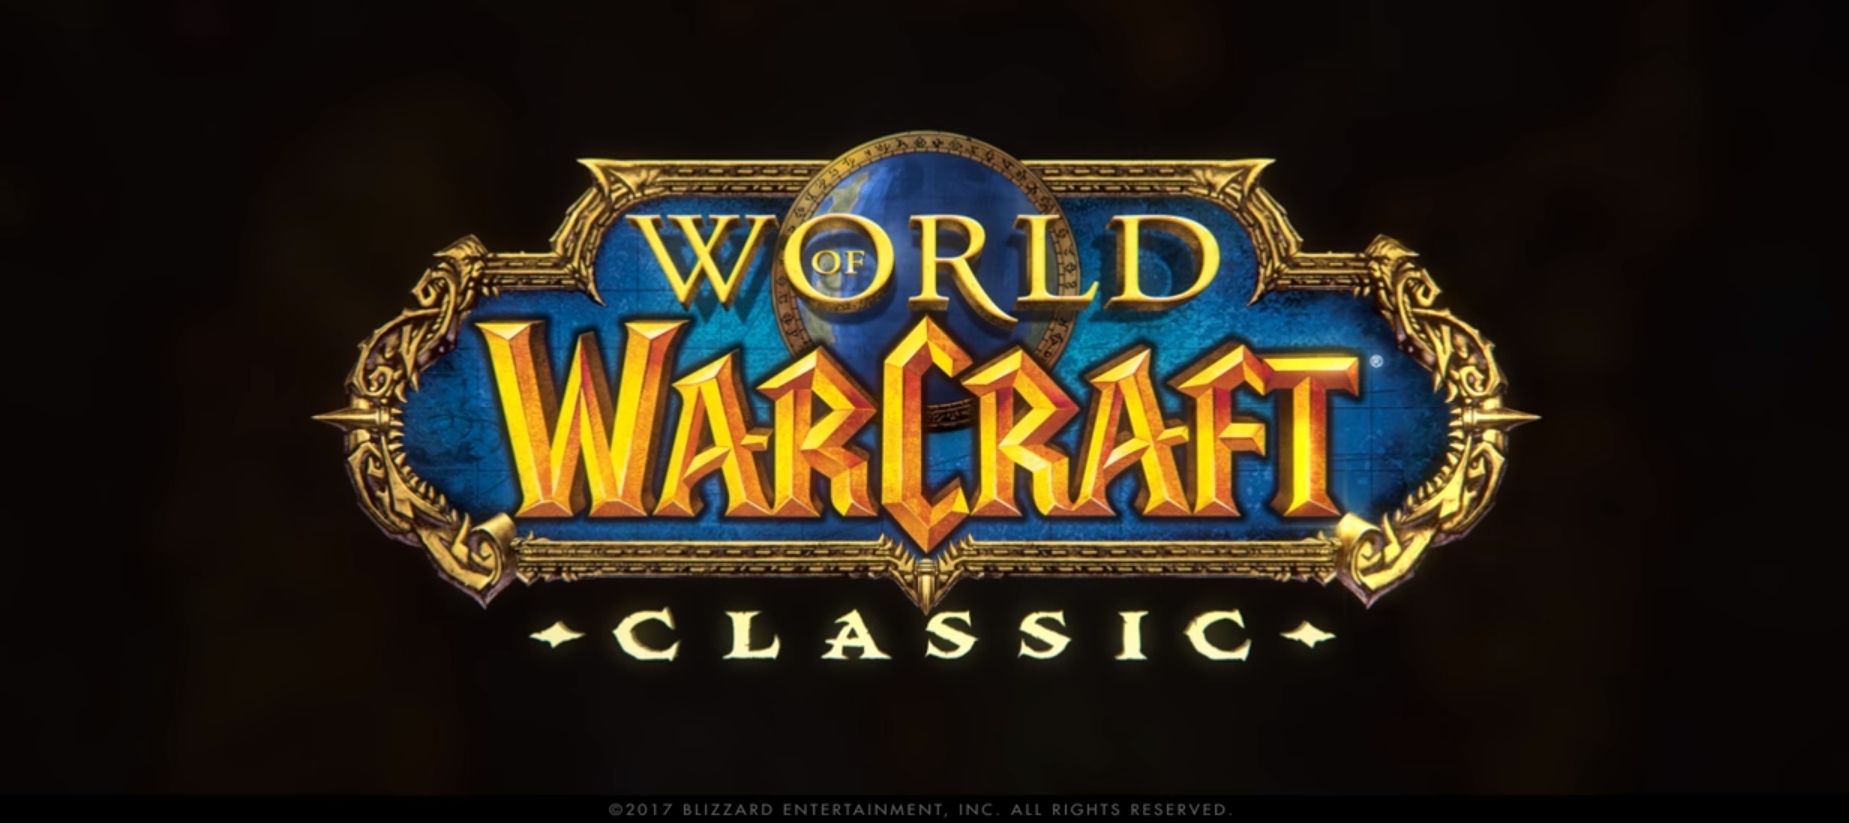 World Of Warcraft: Classic Is Getting Their First Noblegarden Easter Event Tomorrow